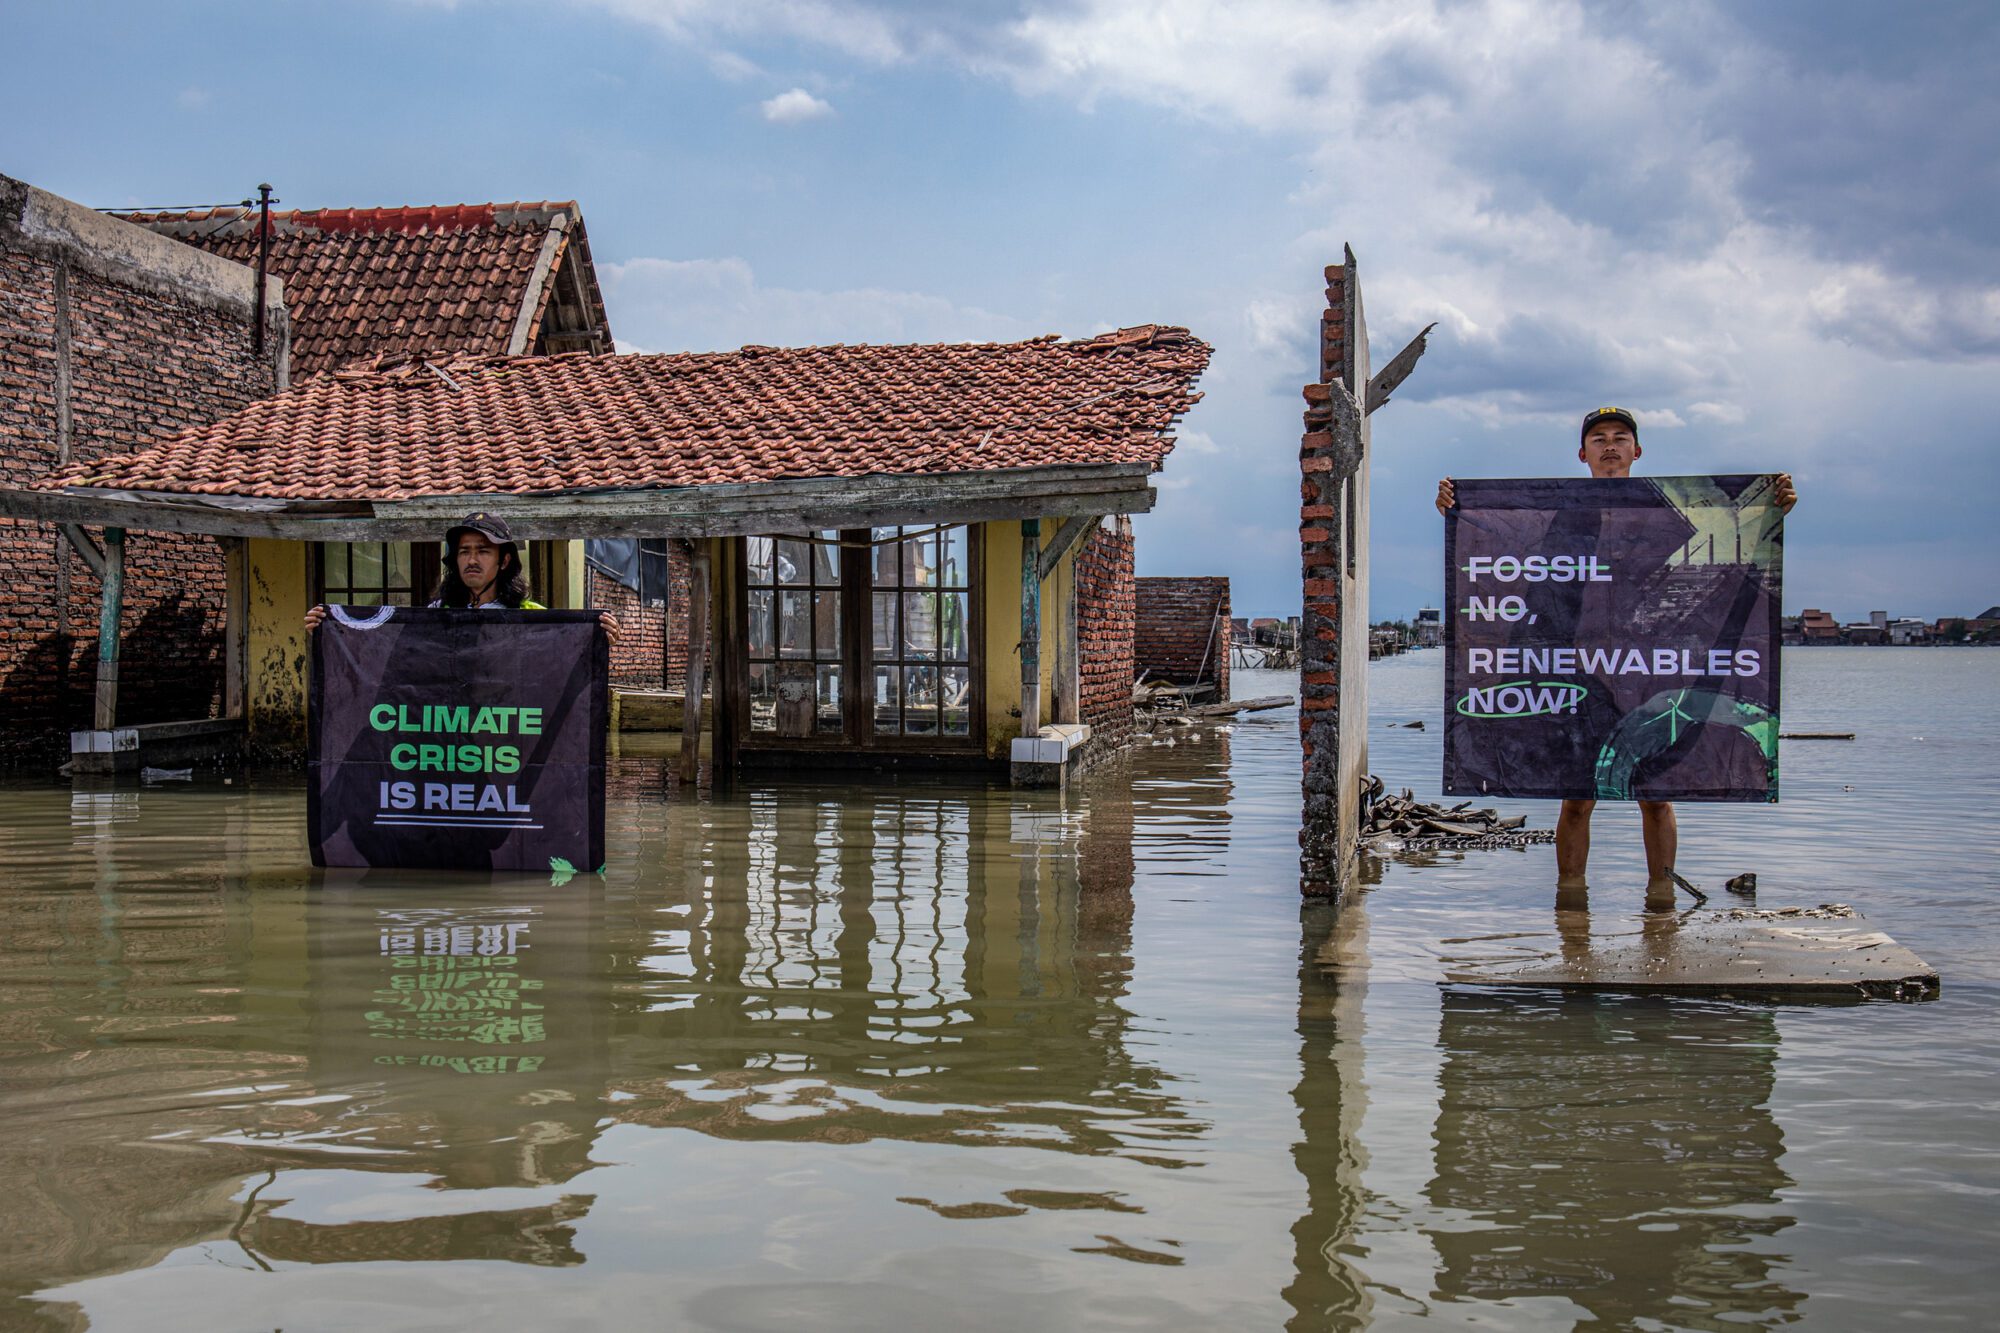 Two people stand in floods next to a broken house. Their banners read “Climate crisis is real” and “Fossil no. Renewables now”